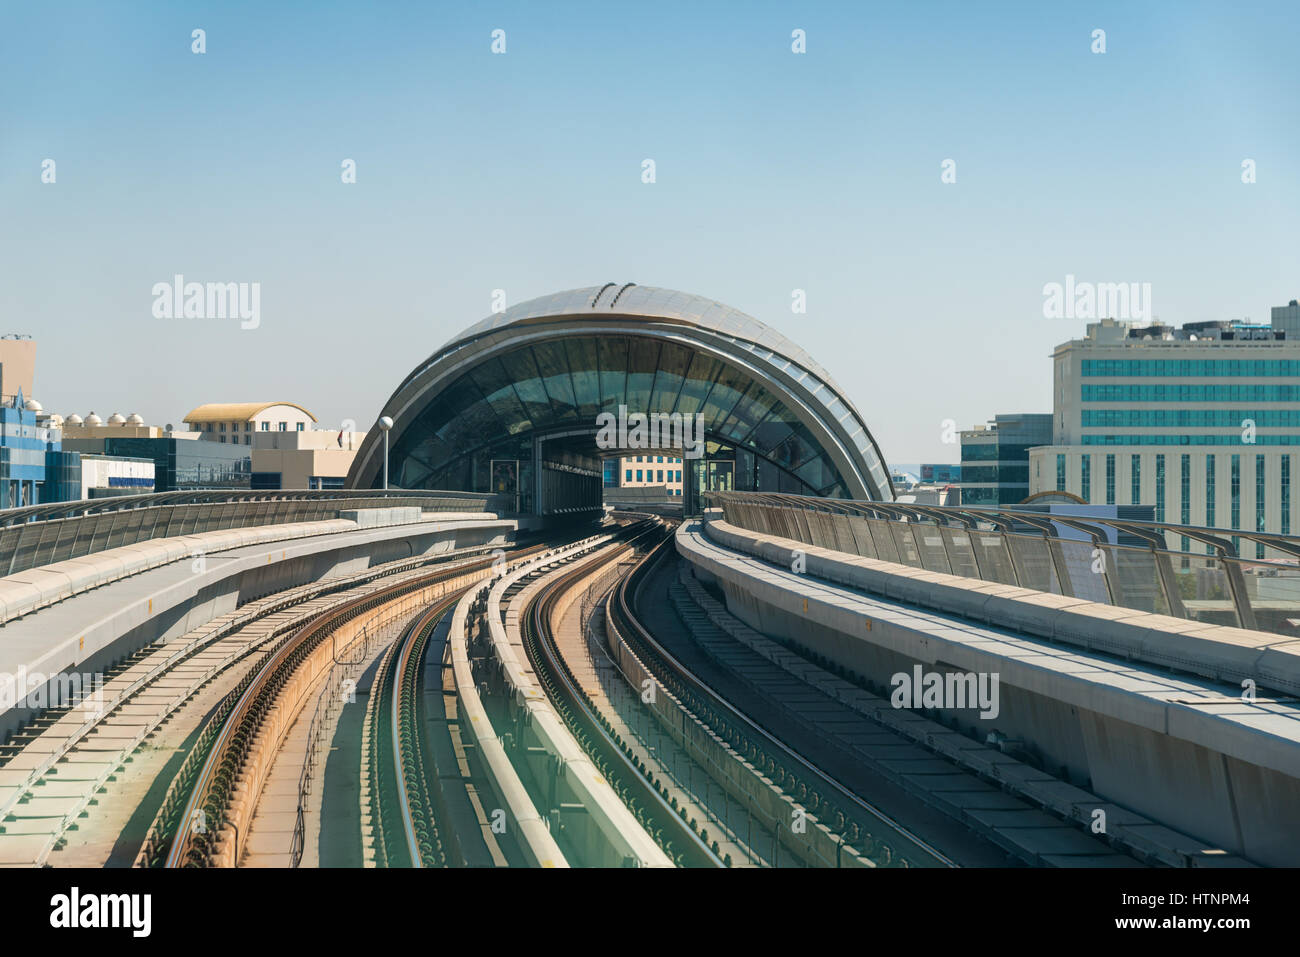 City train track and station Stock Photo